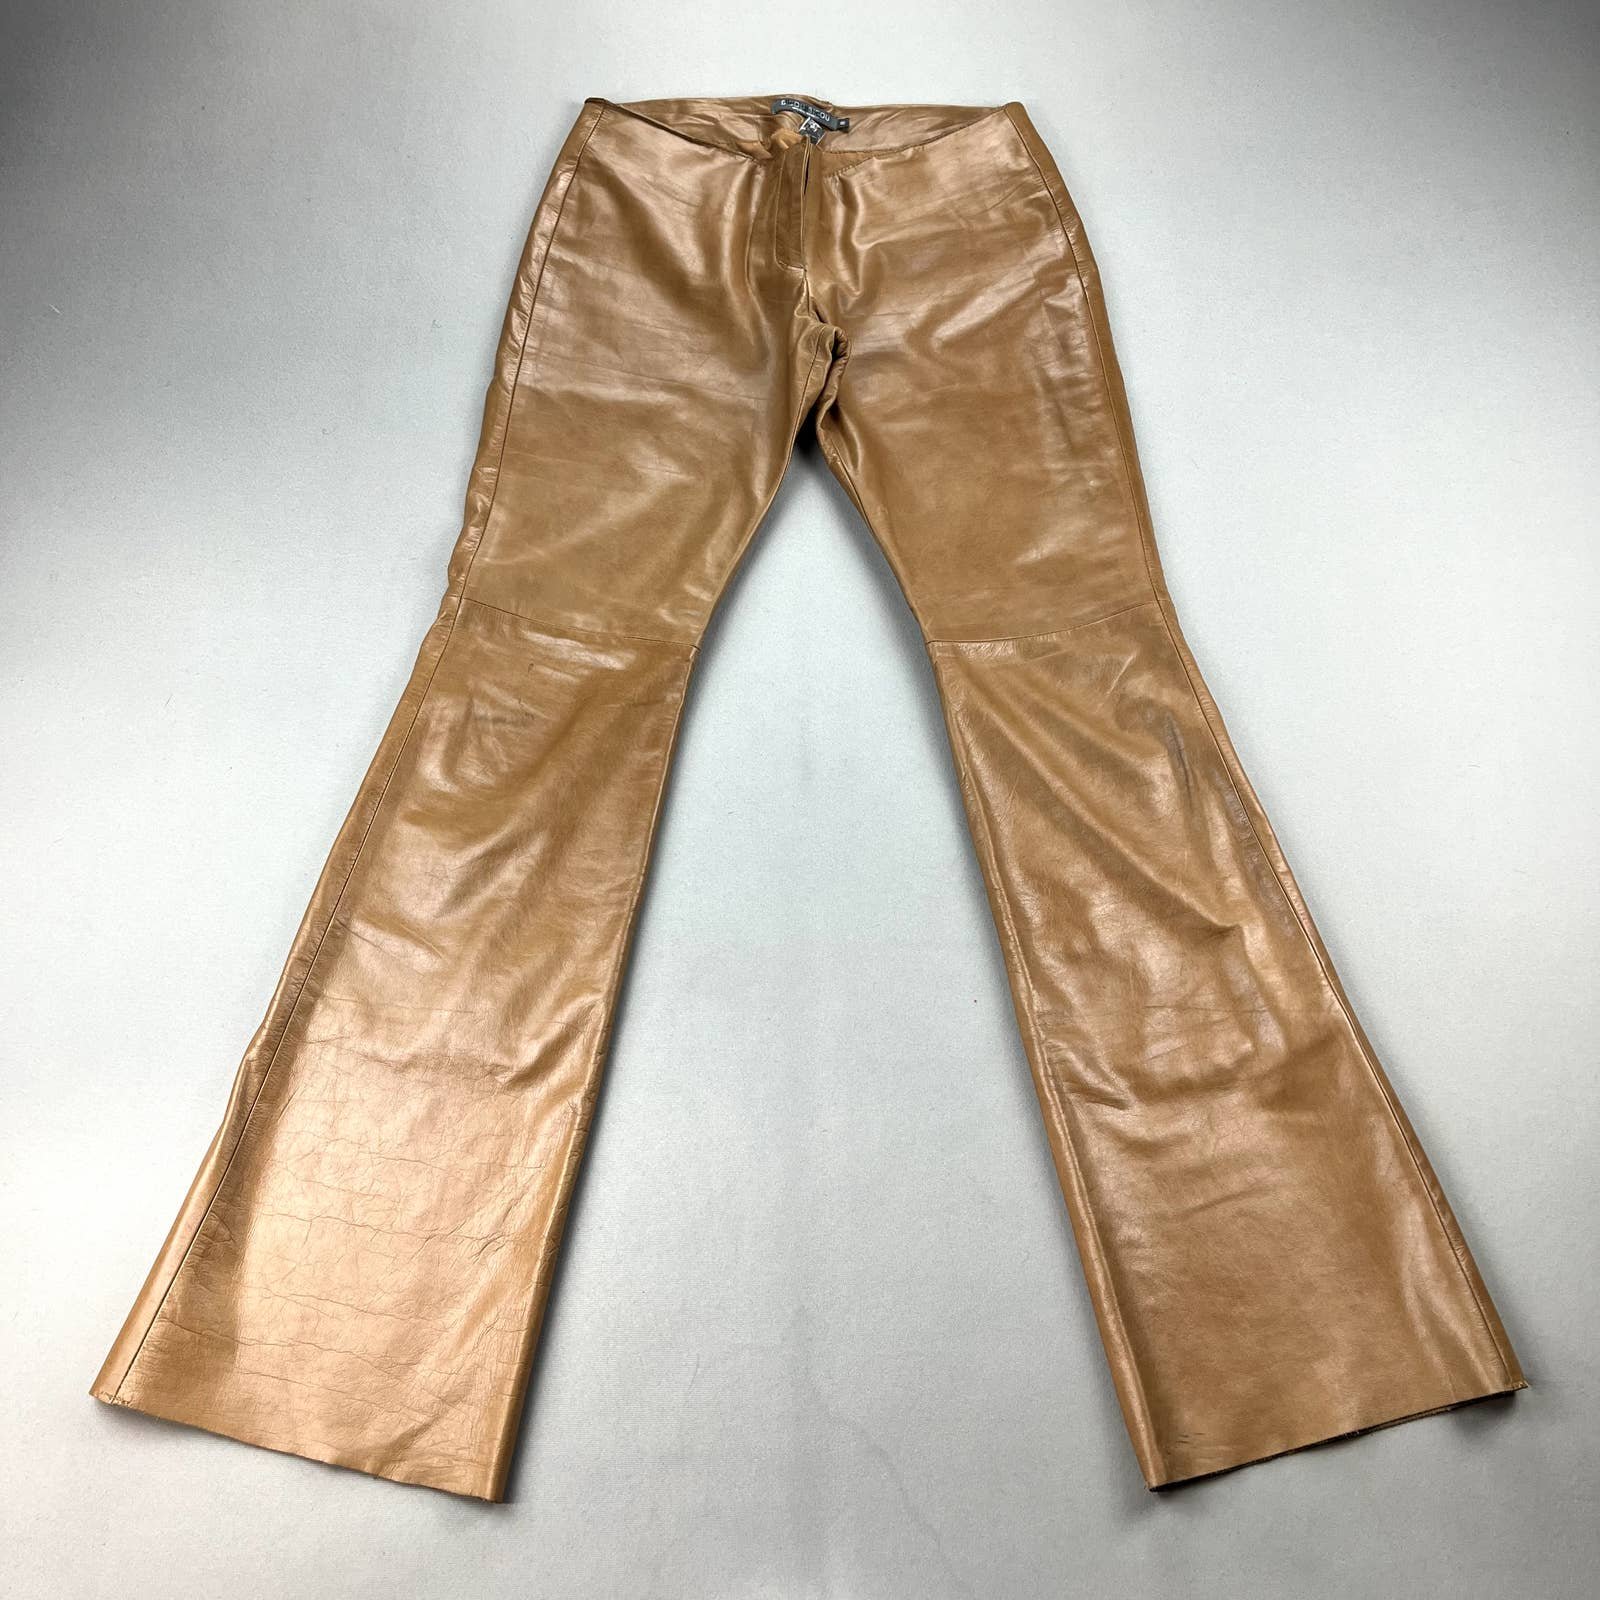 reasonable price Vintage Leather Flare Pants Womens 8 T